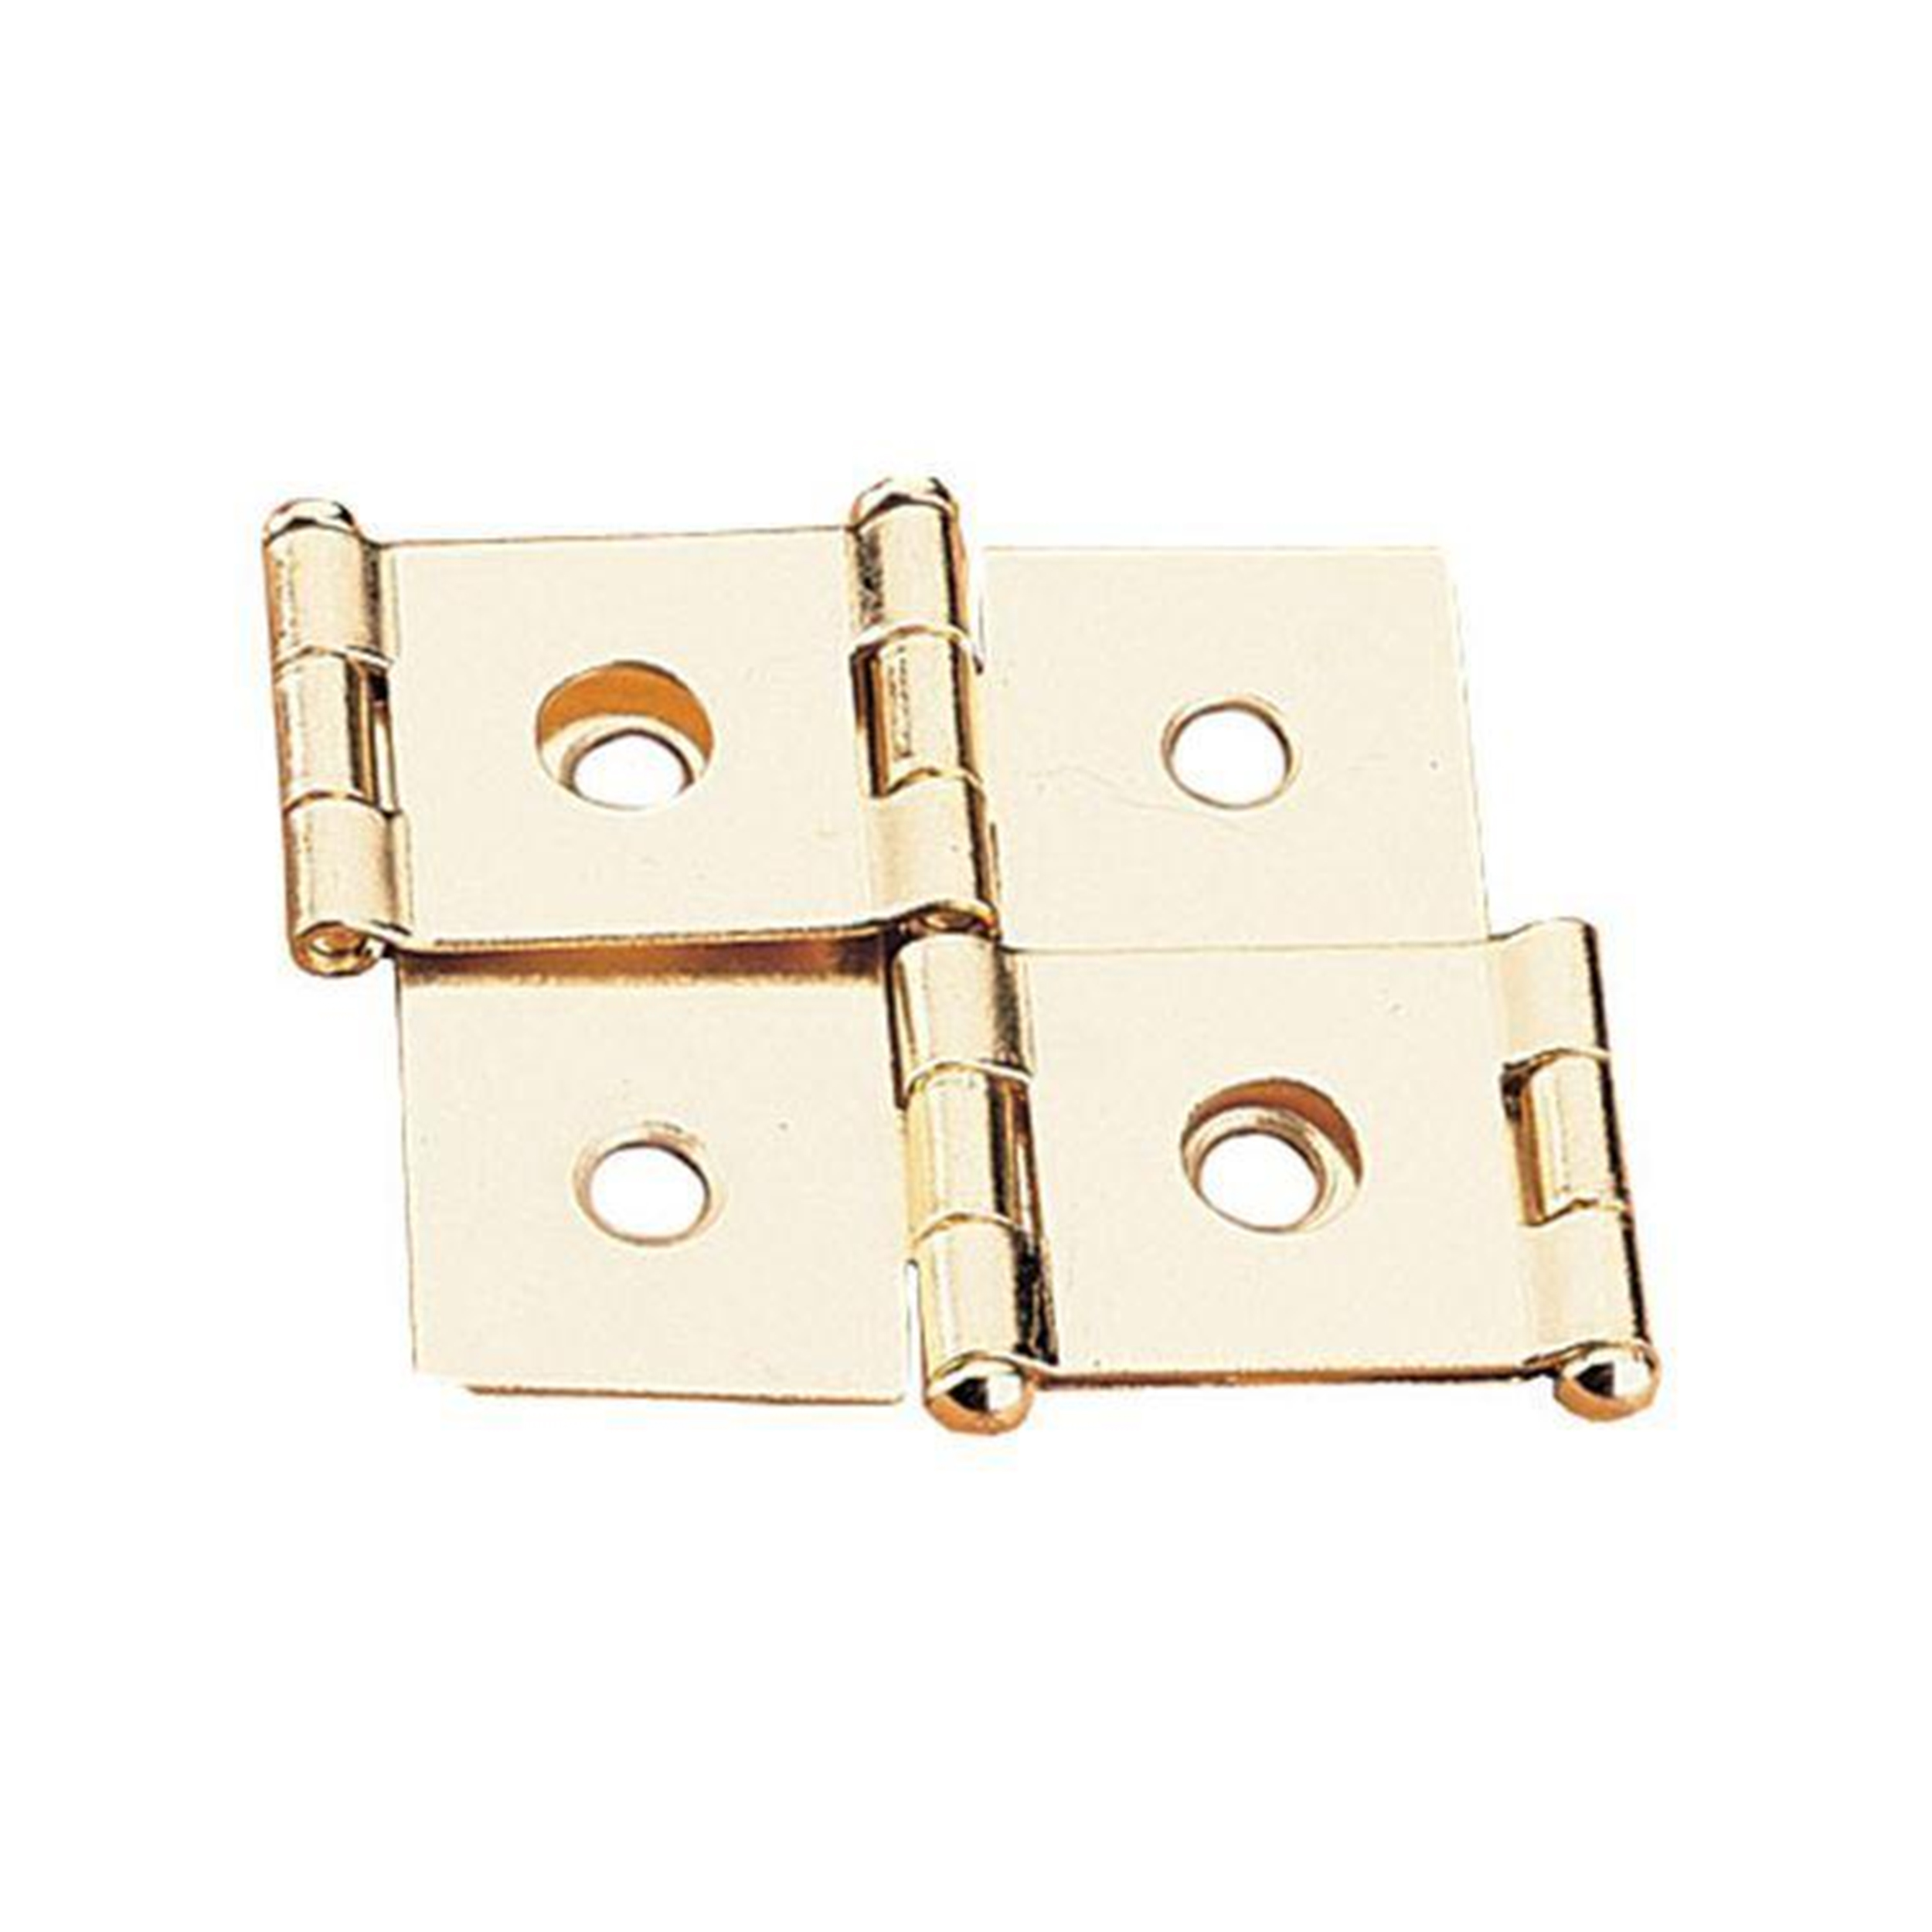 Non-mortise Hinge Polished Brass Plated, Pair, Fits 1-1/8" Panels